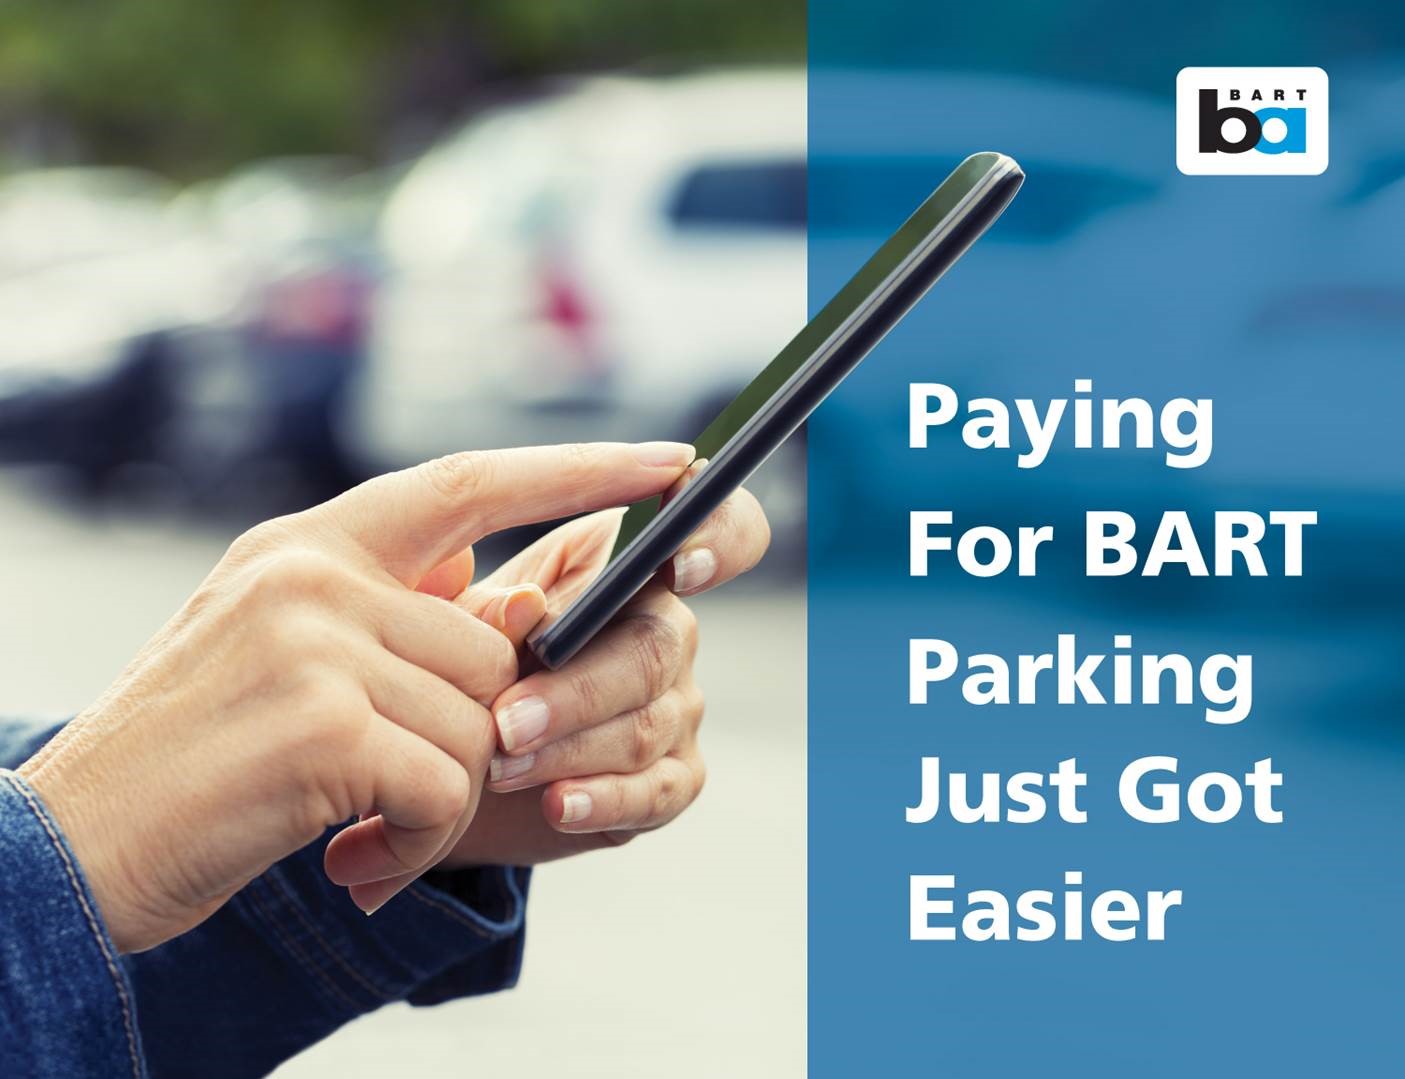 Paying for parking just got easier